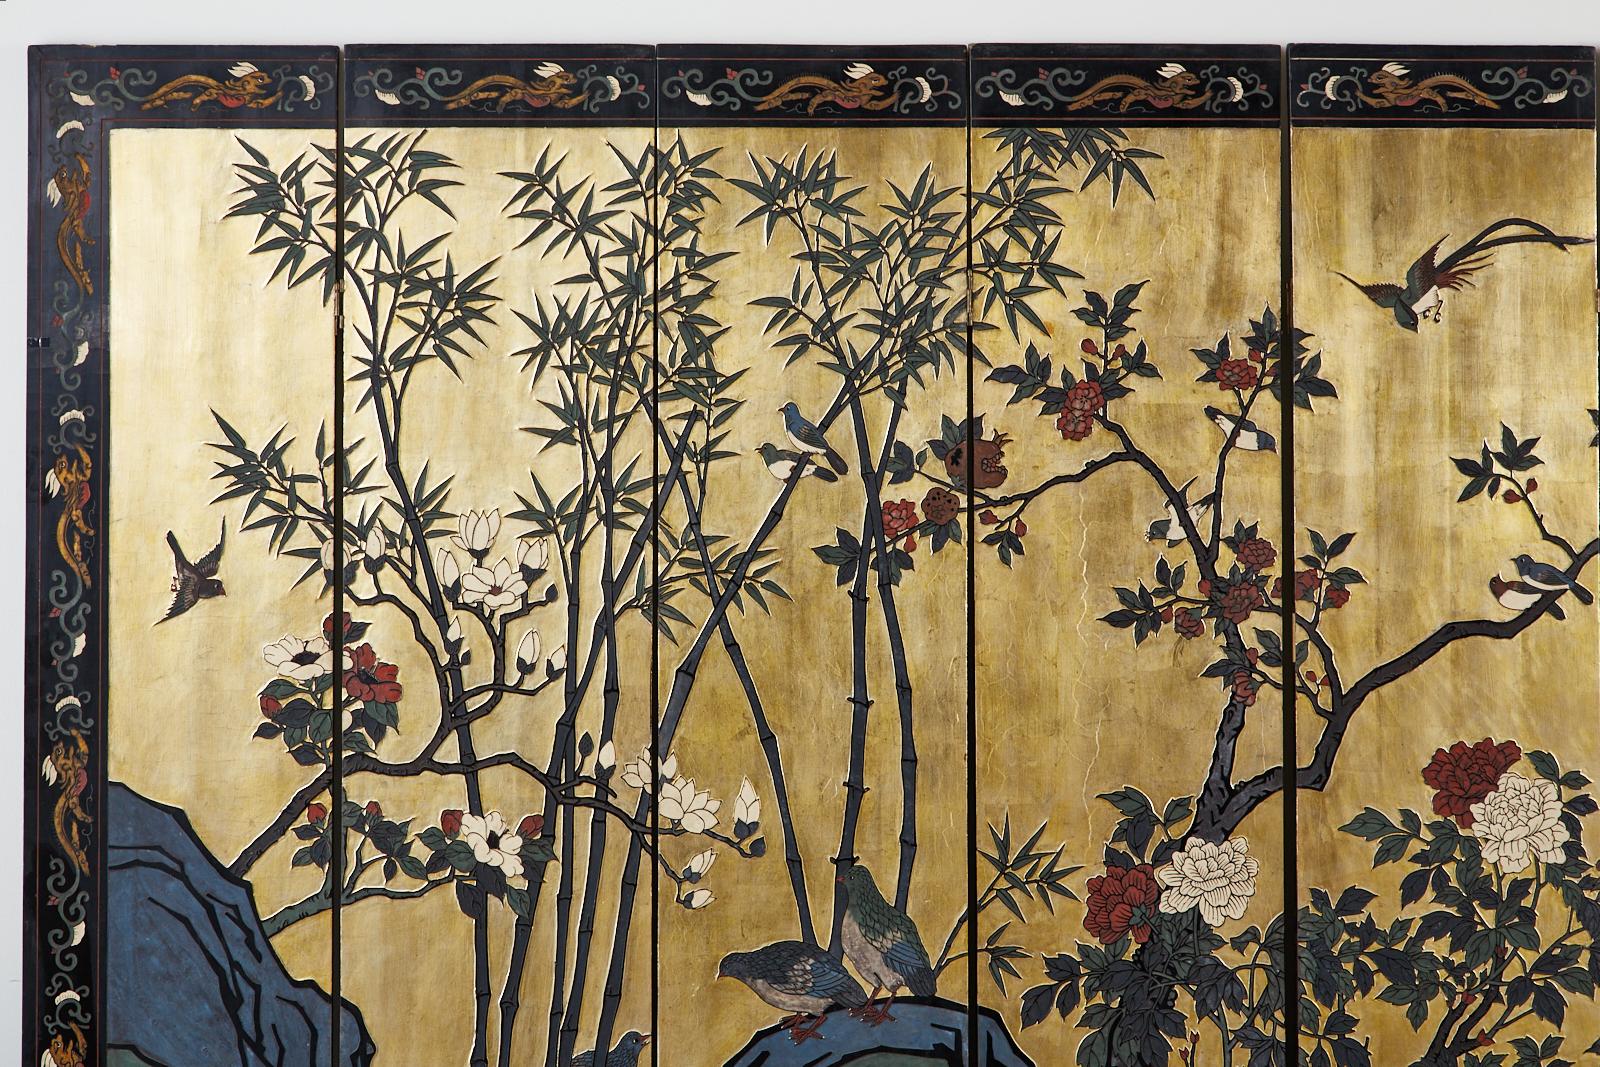 Fantastic Hollywood Regency period Chinese export eight-panel lacquered coromandel screen. Features a flora and fauna landscape with a stunning gilt background. The incised lacquer panels are colored with vibrant reds, whites, blues, and greens. The